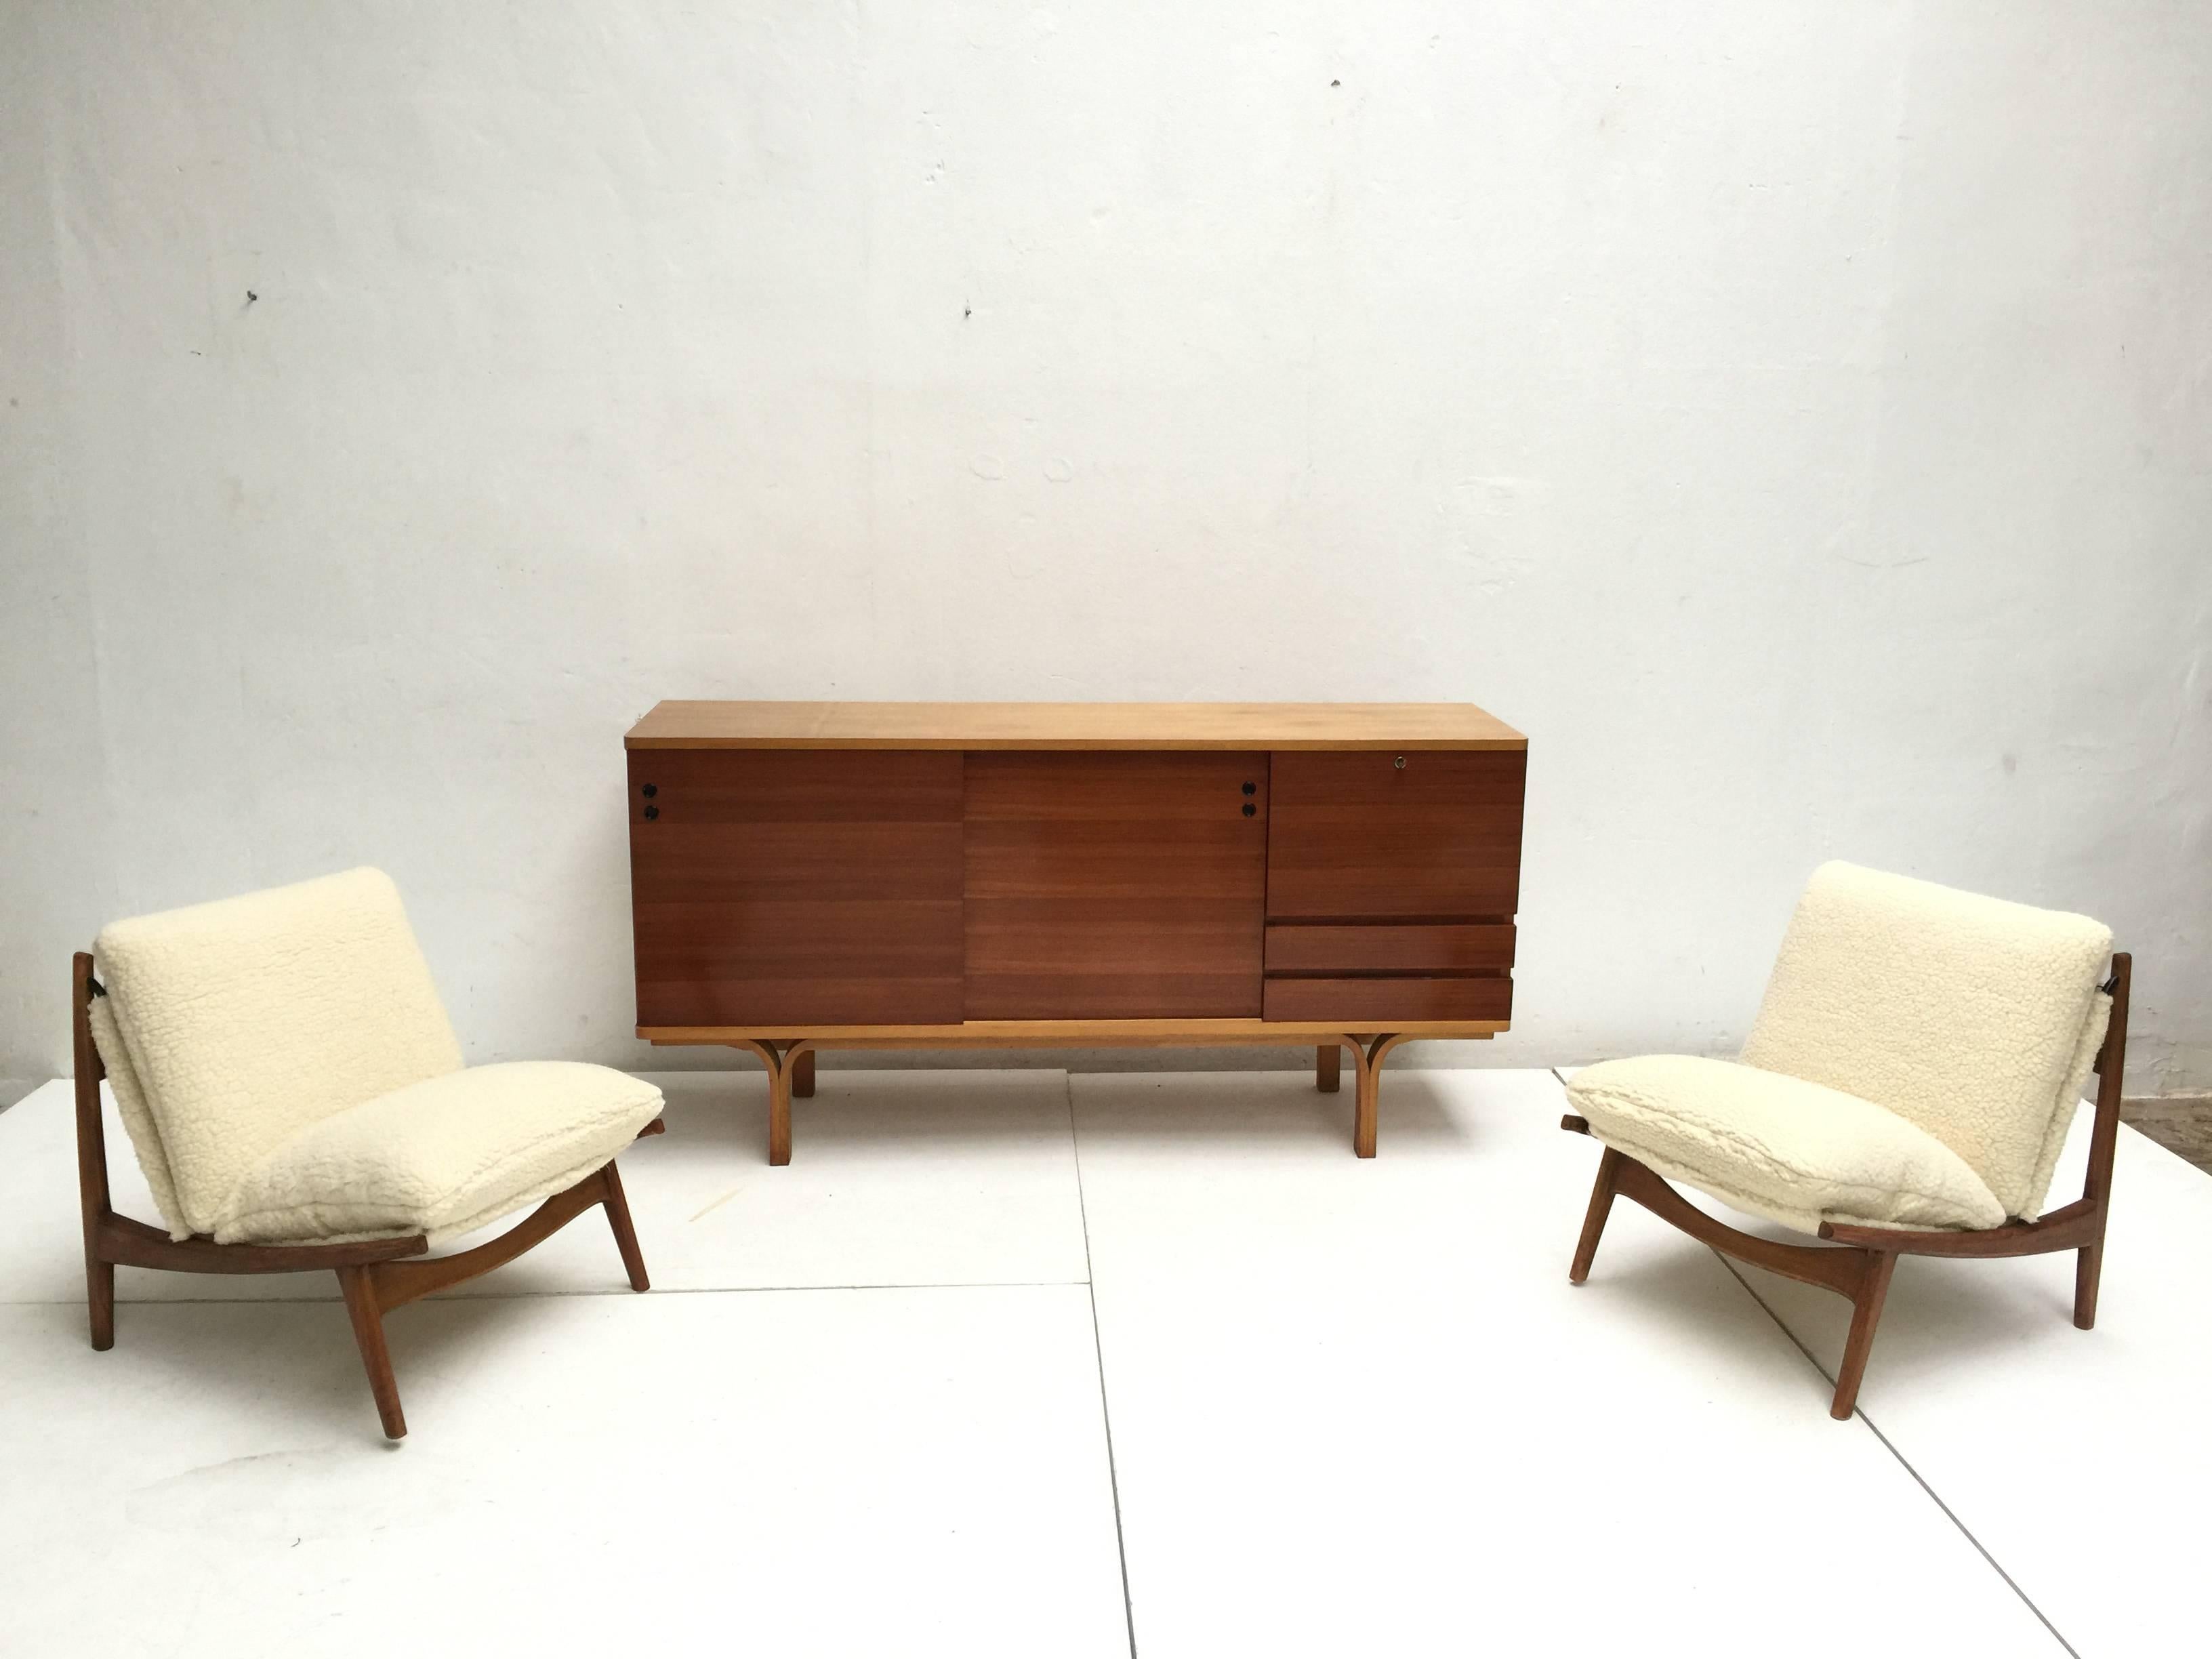 Mid-20th Century Stunning Ash and Mahogany Credenza Bar by J.A Motte, 1954 for Group 4 Charron